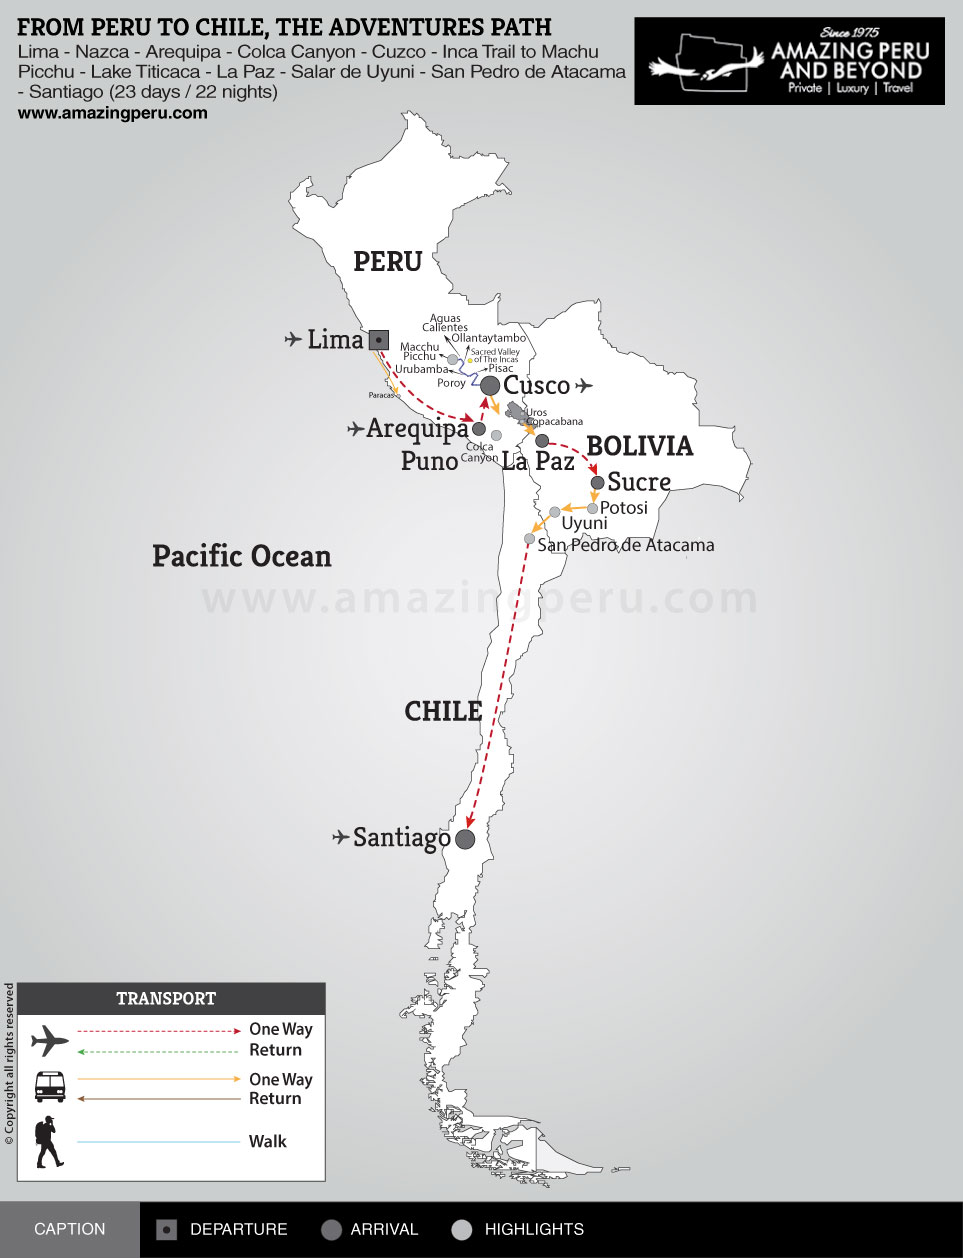 From Peru to Chile, the Adventures Path - 23 days / 22 nights.